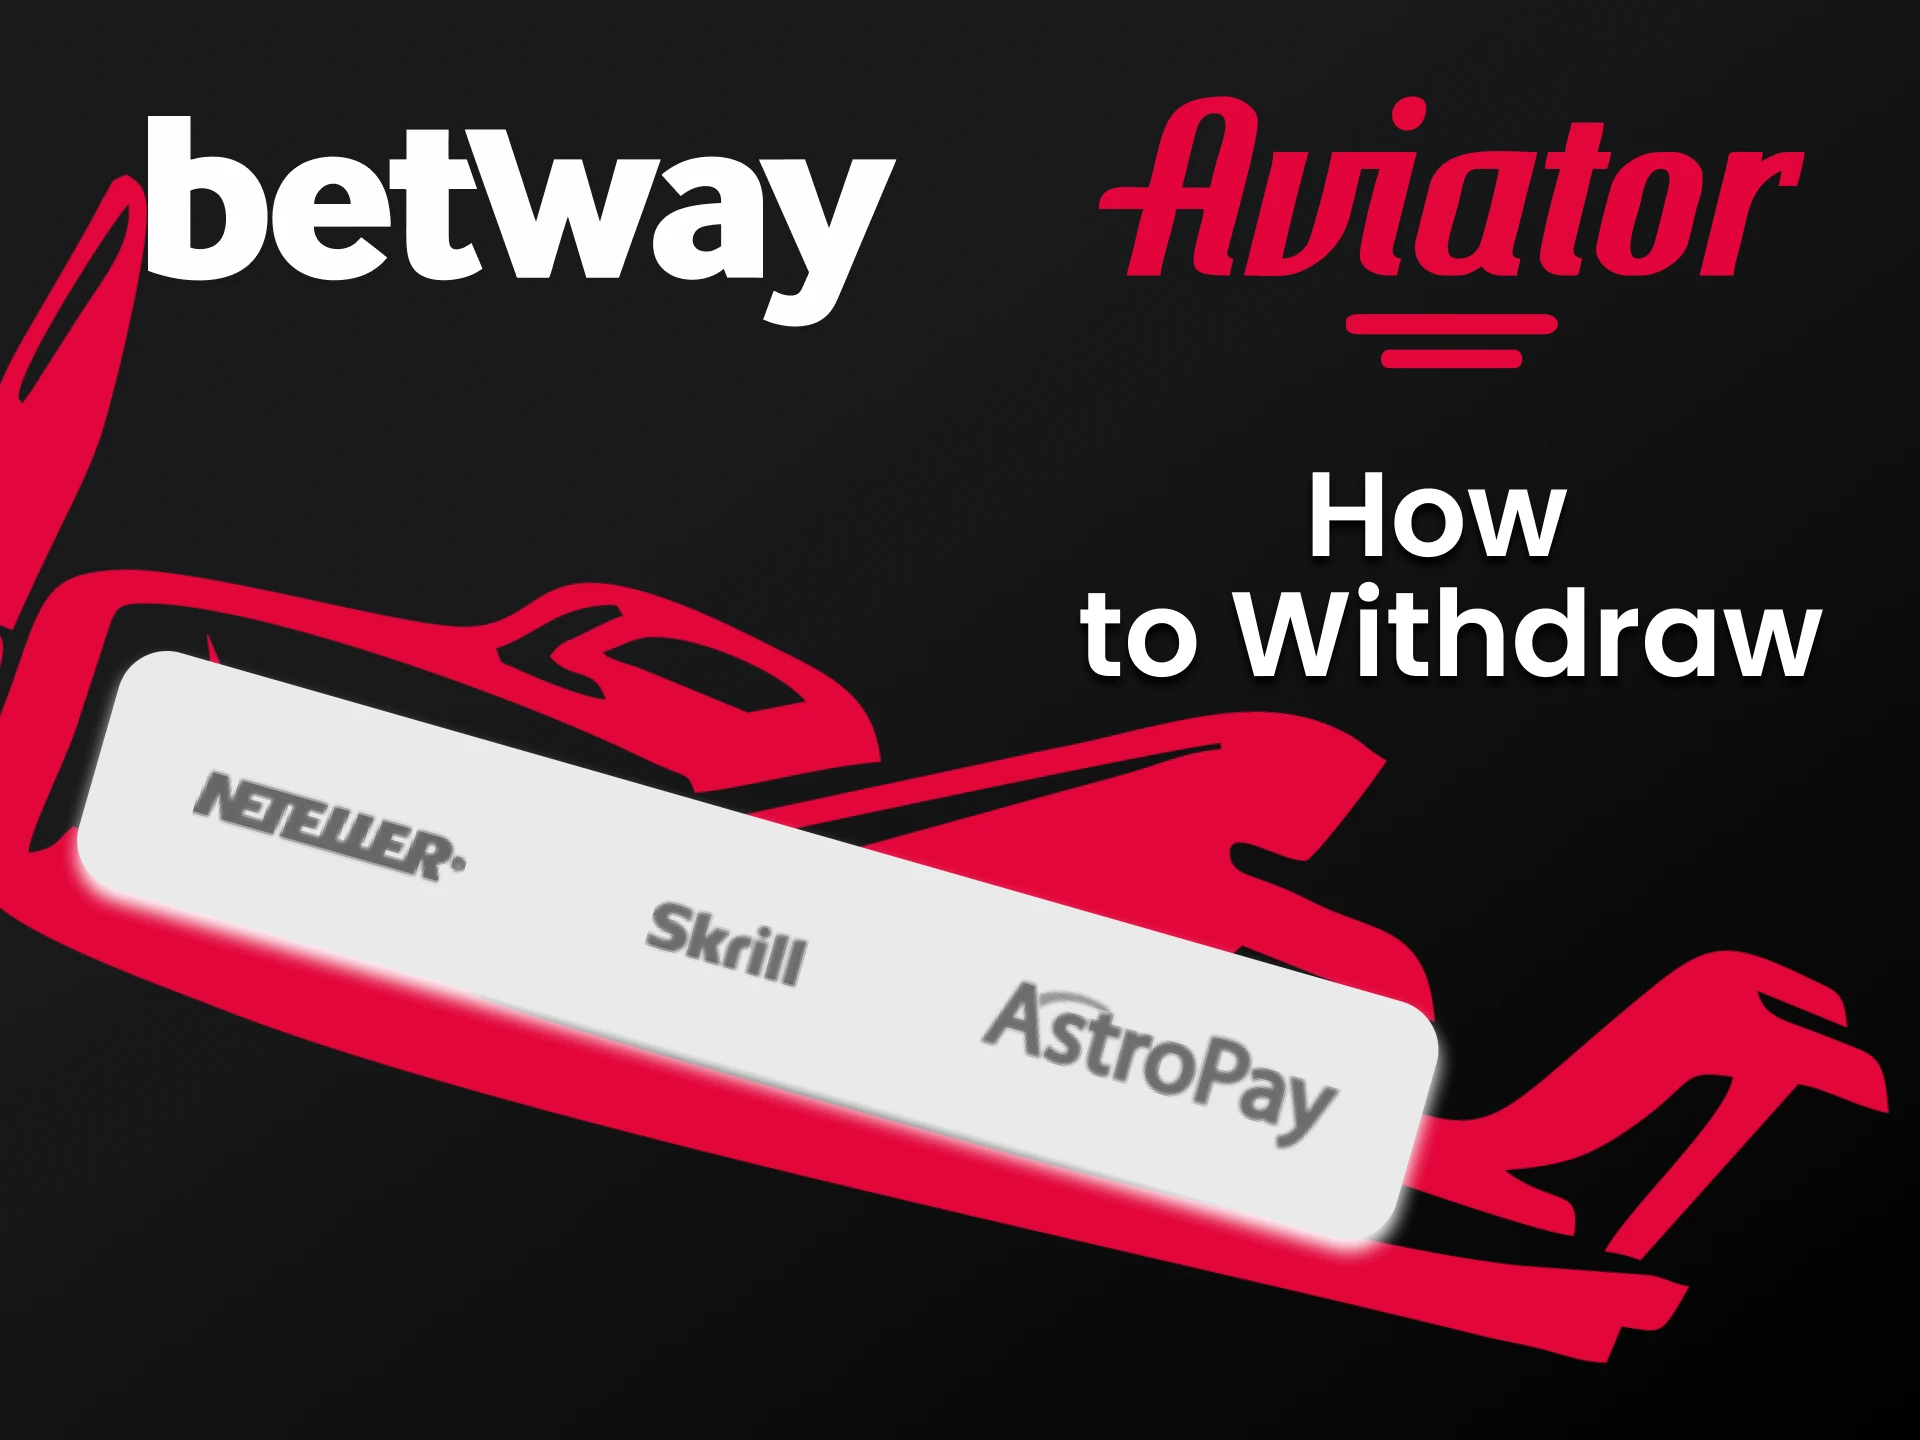 Withdraw funds in a convenient way provided by Betway.